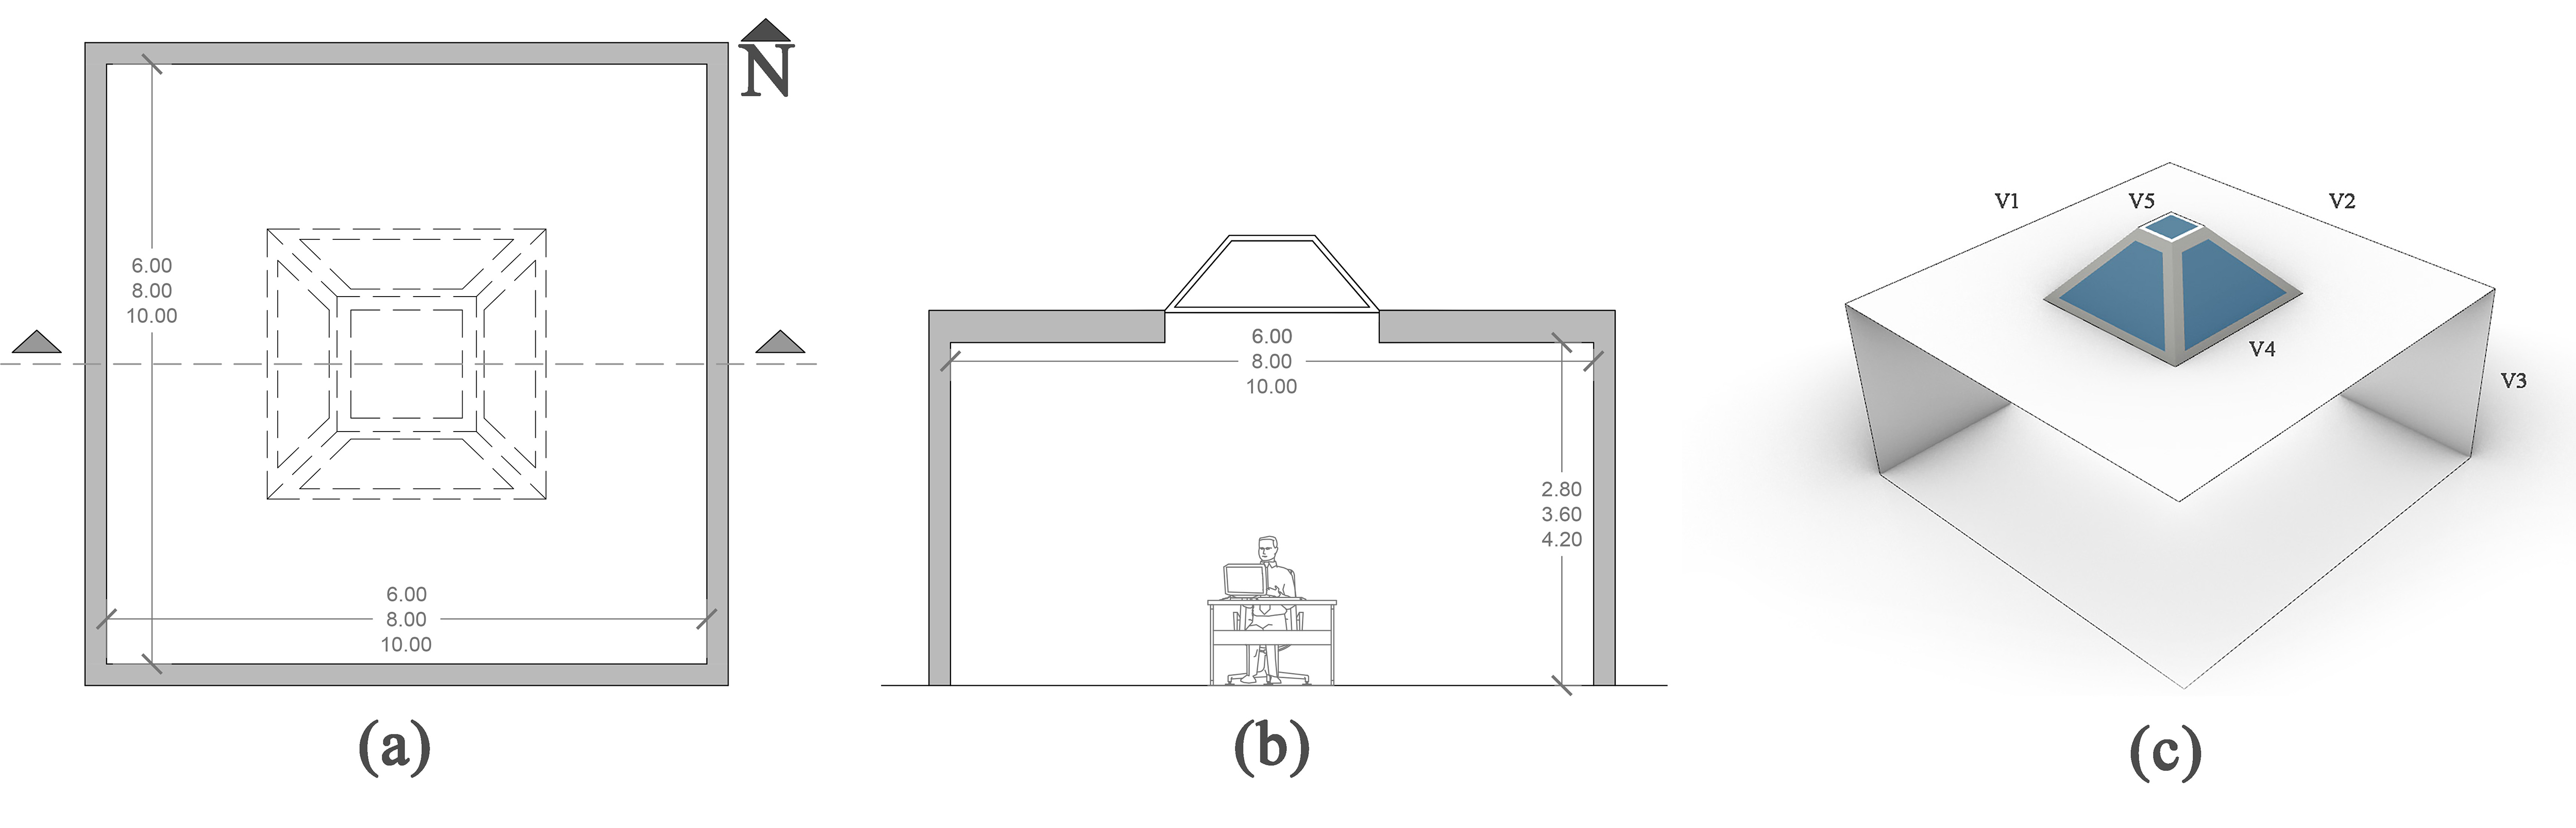 (a) Architectural plan, (b) Section, and (c) The geometry of the single case.